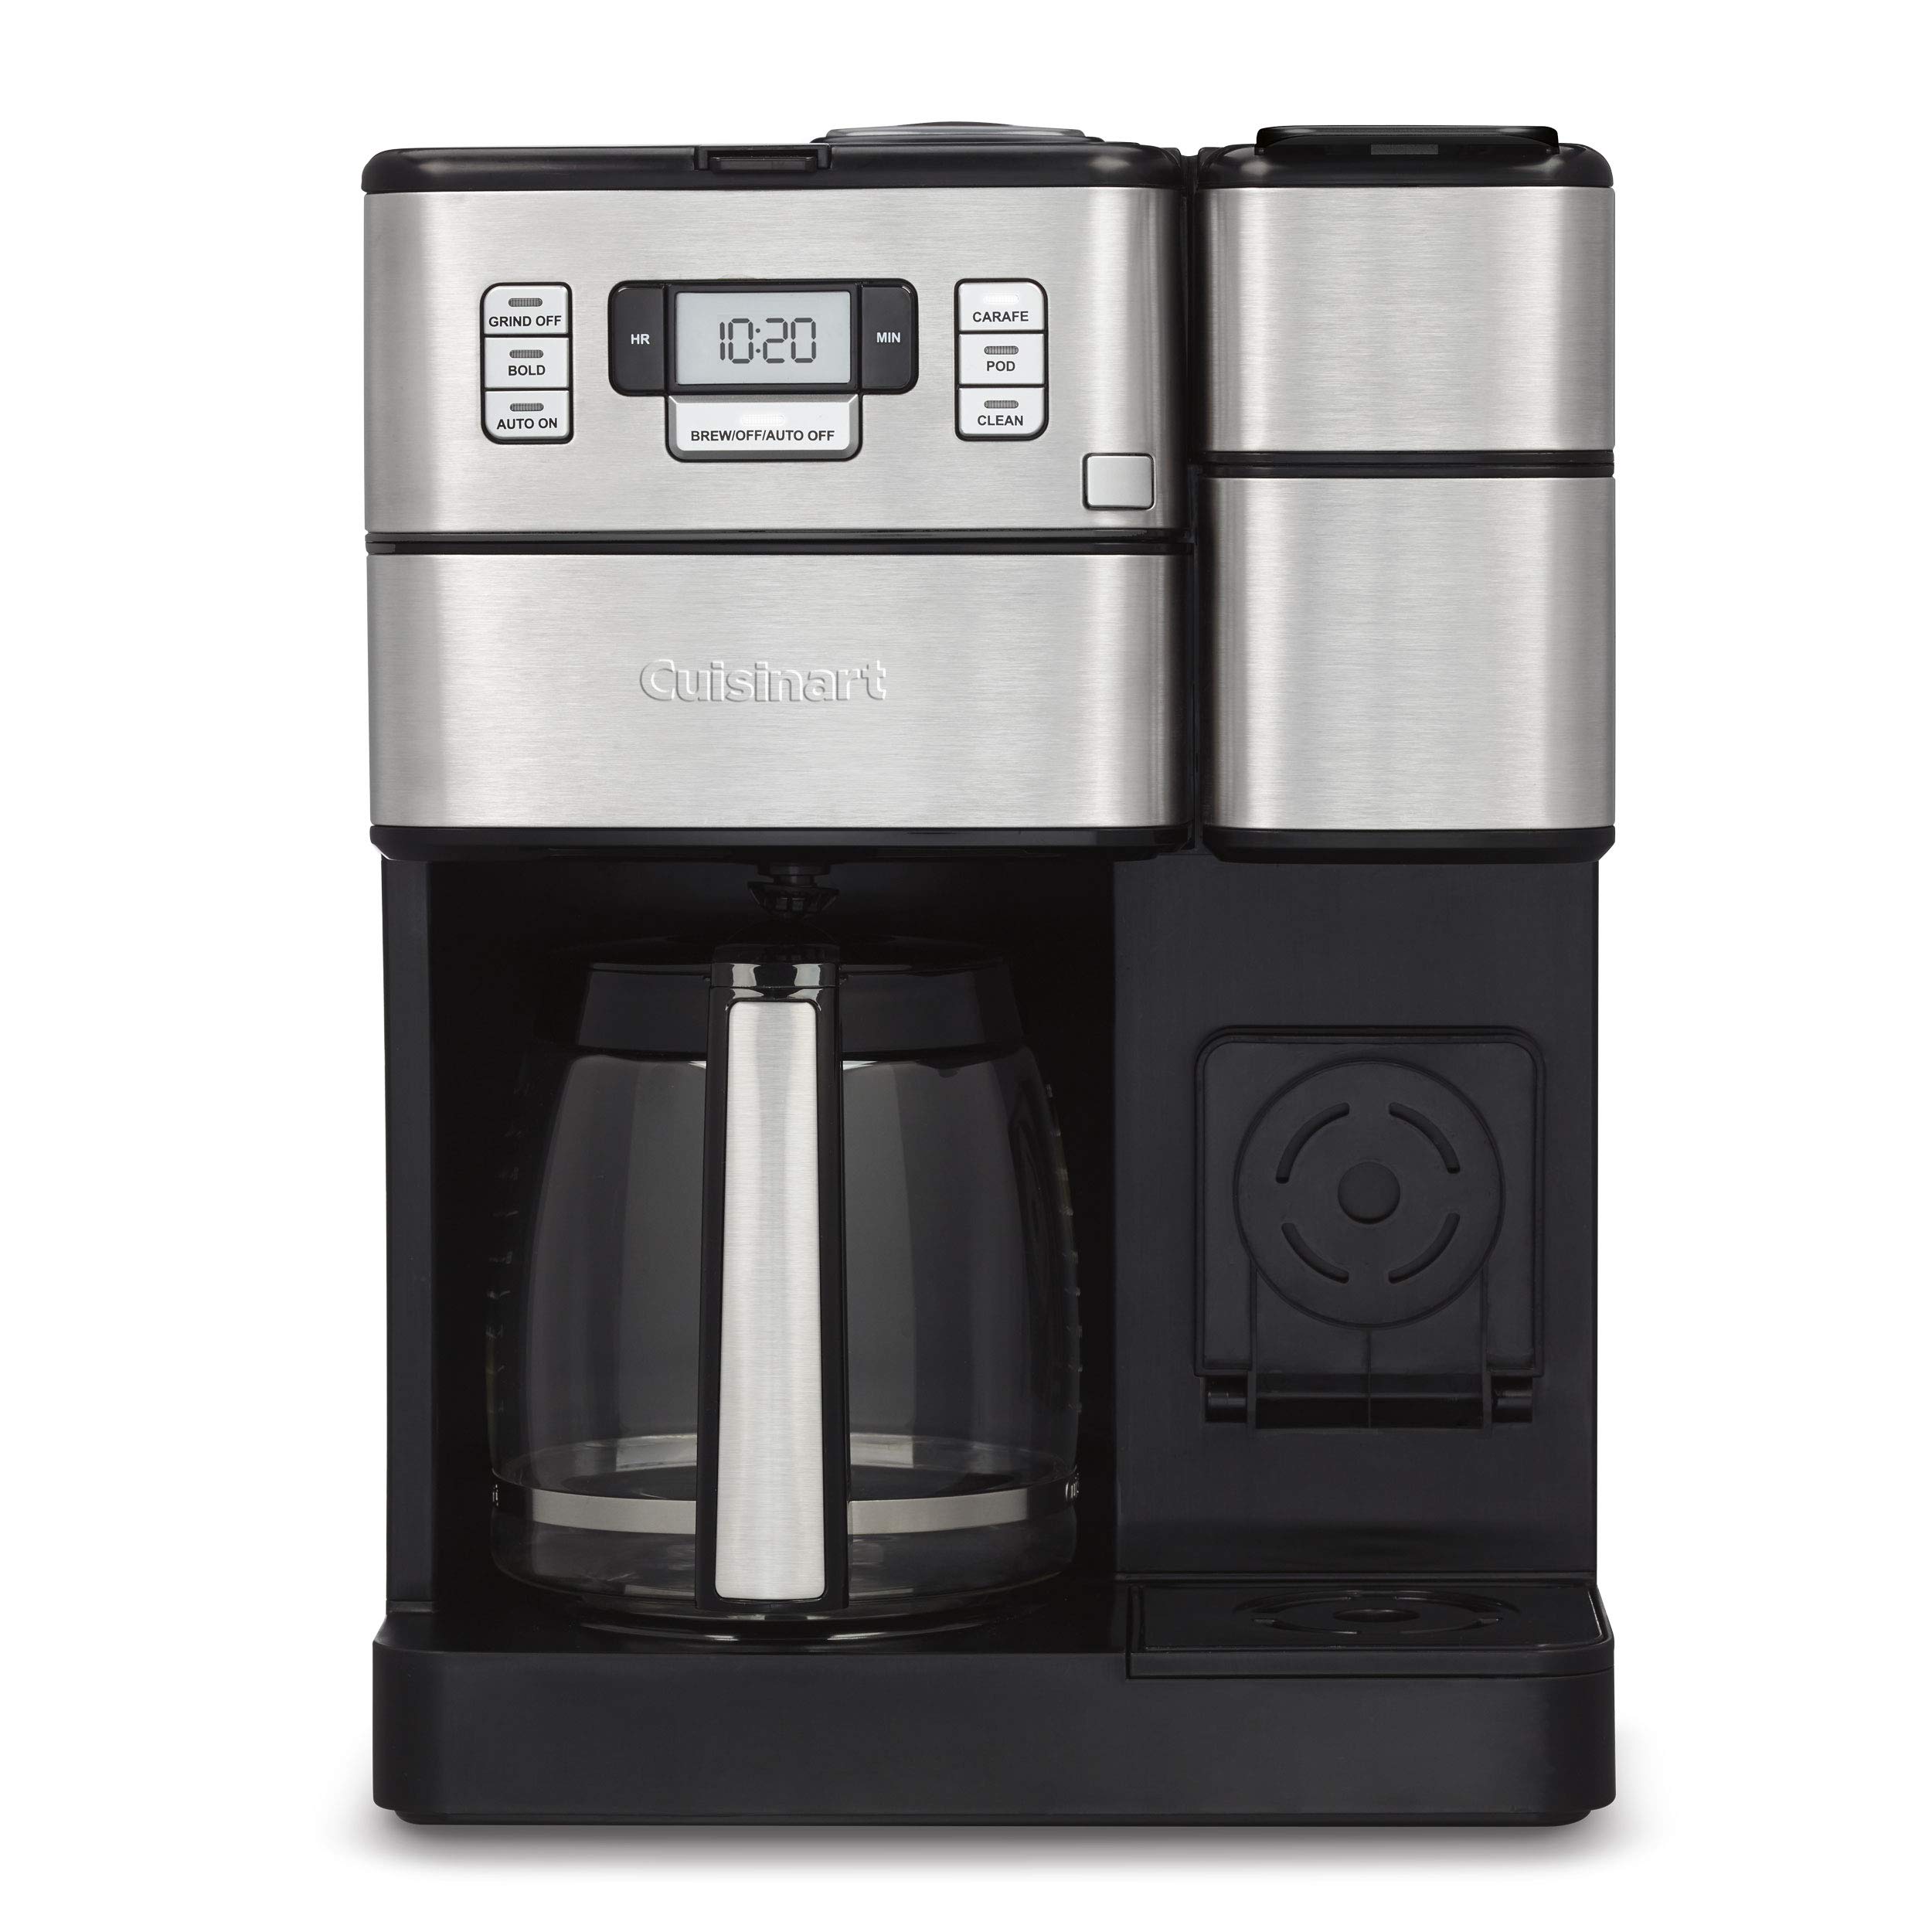 Cuisinart SS-GB1 Coffee Center Grind & Brew Plus Silver